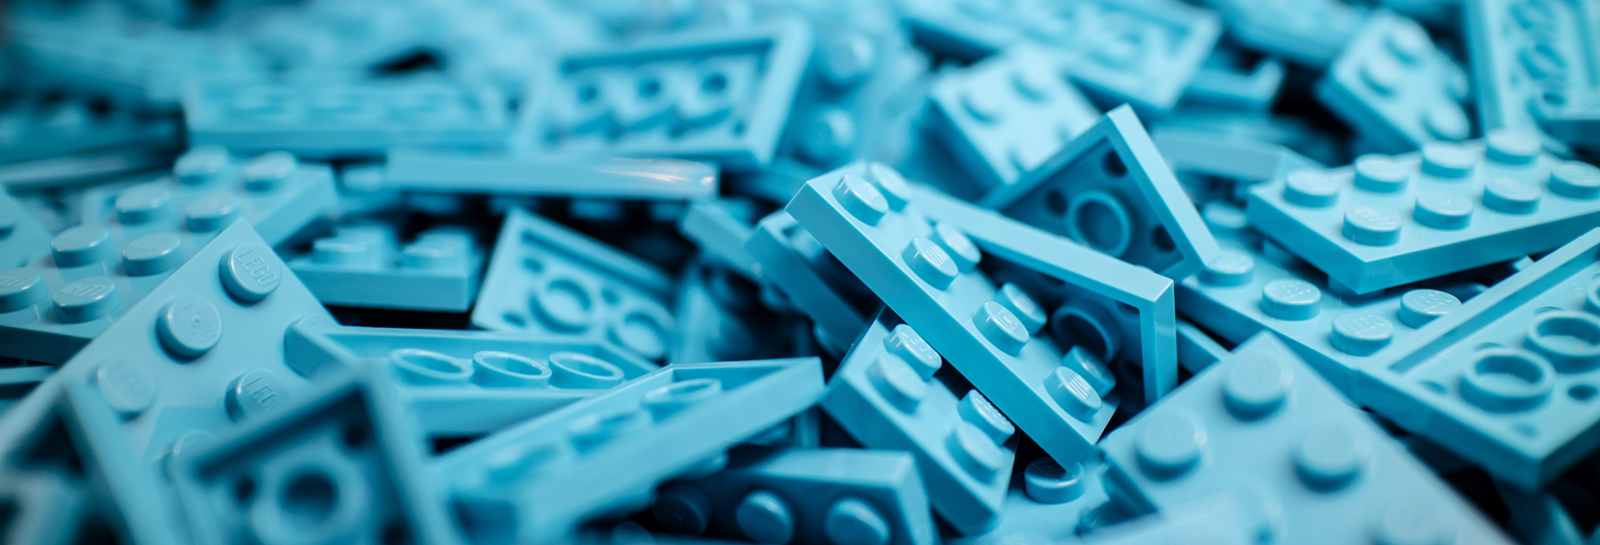 blue legos in a pile